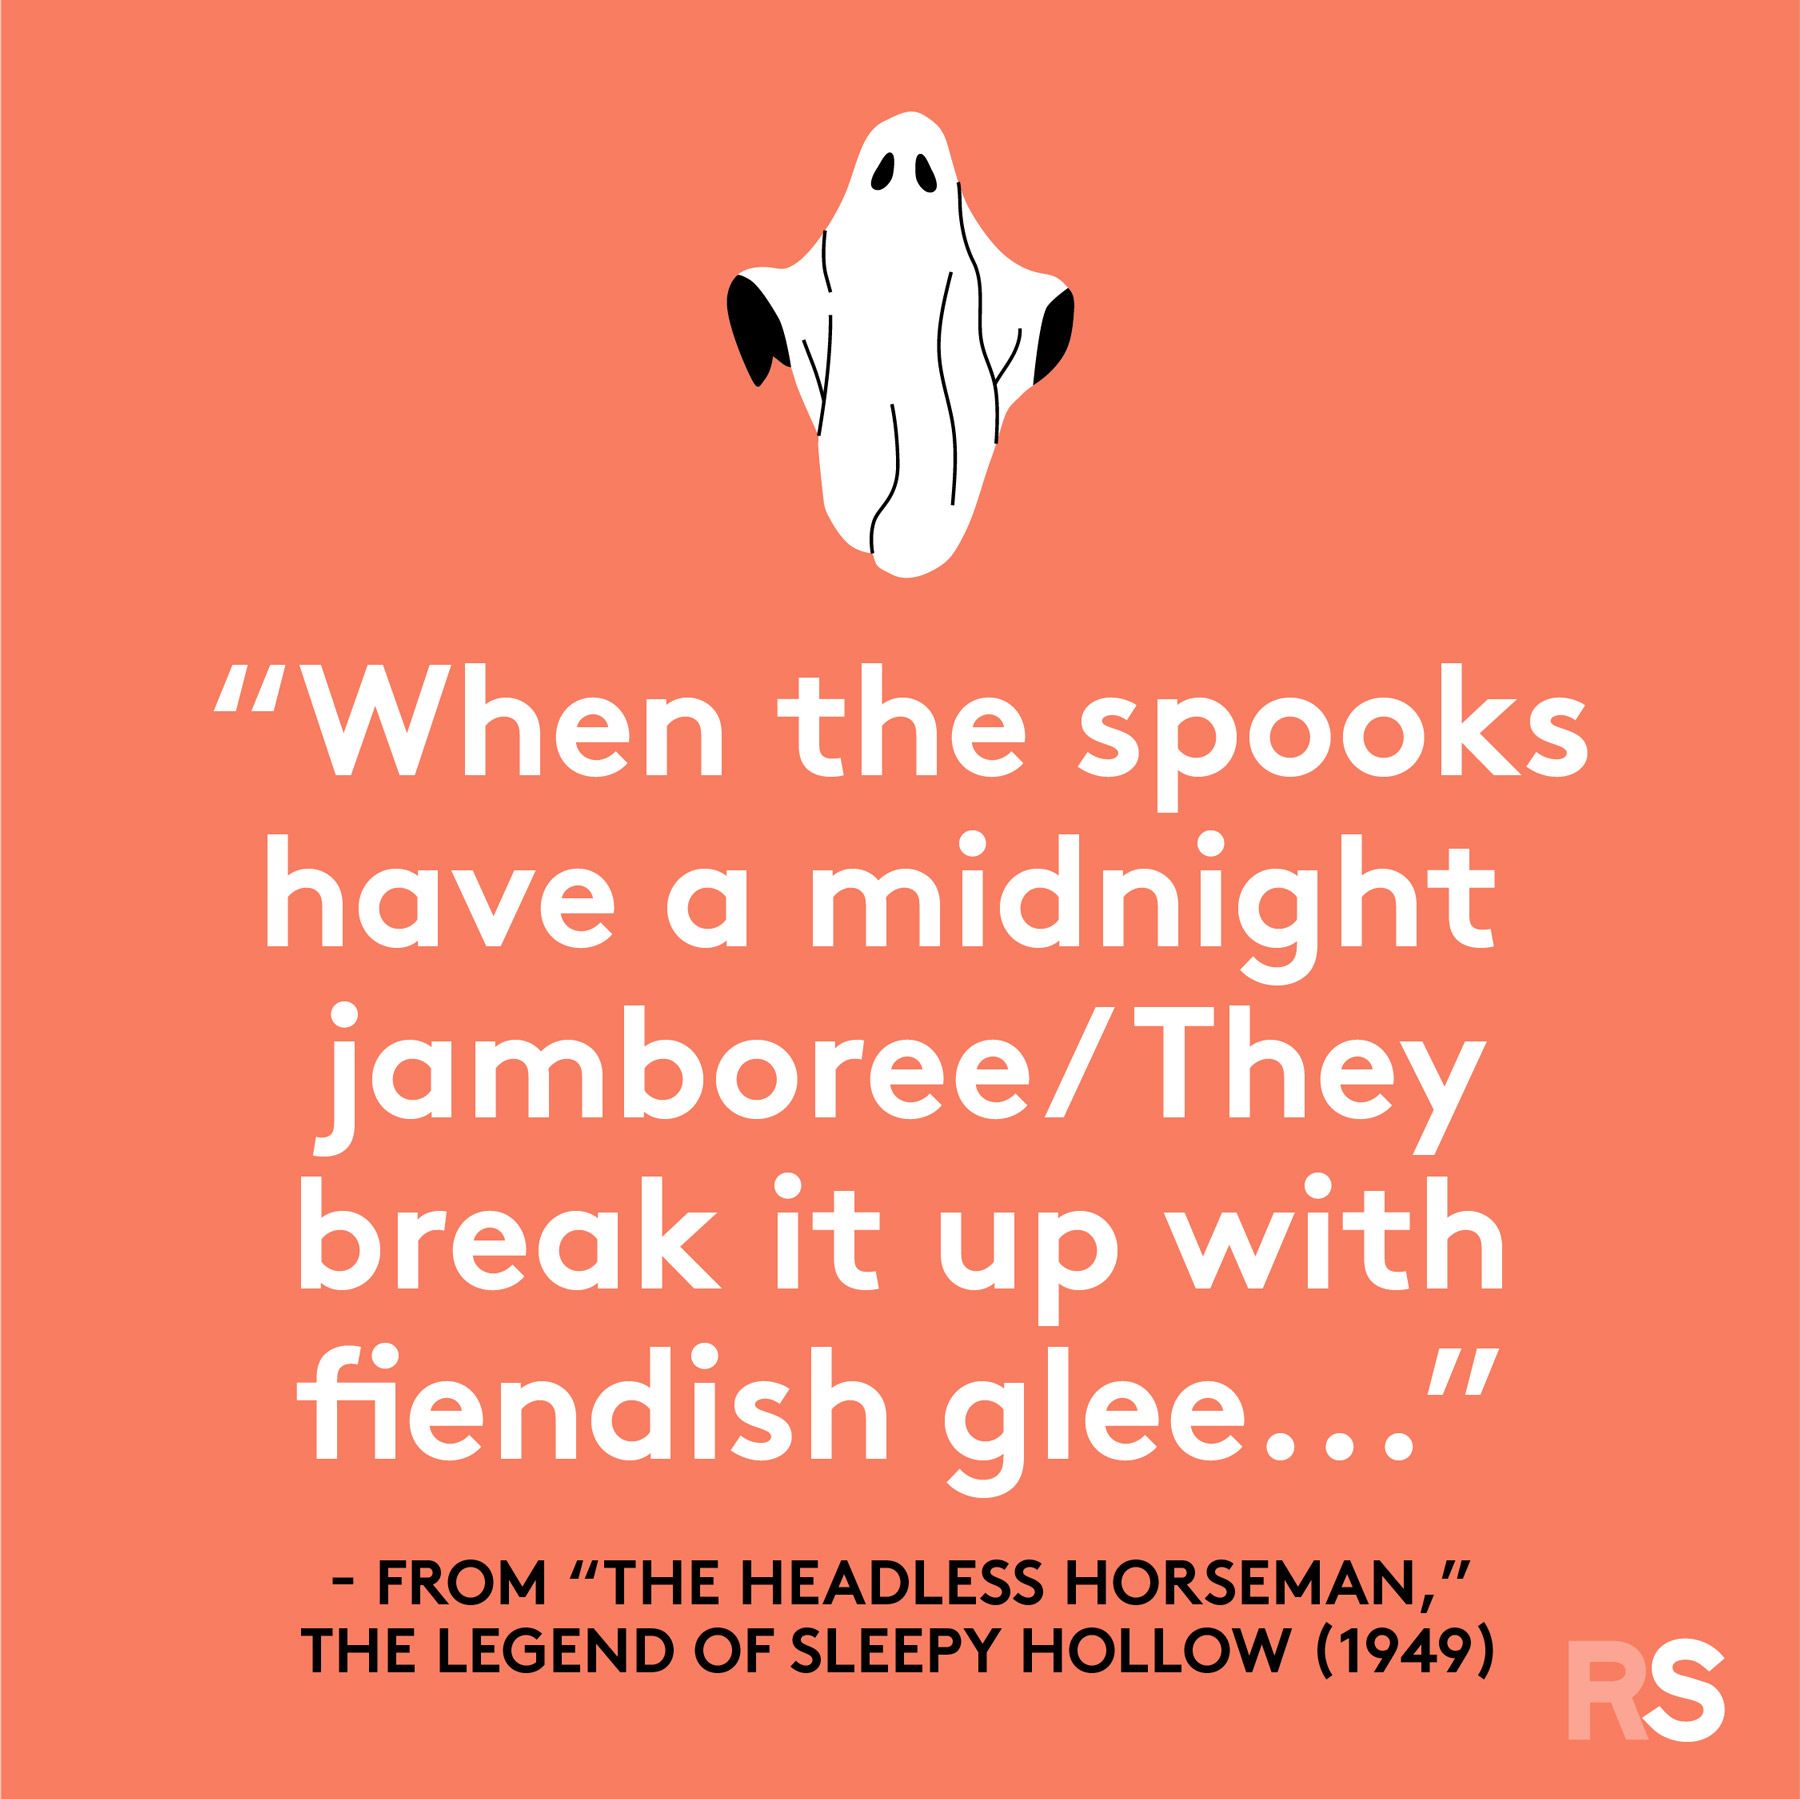 Best Famous Halloween Quotes, Sayings, Phrases